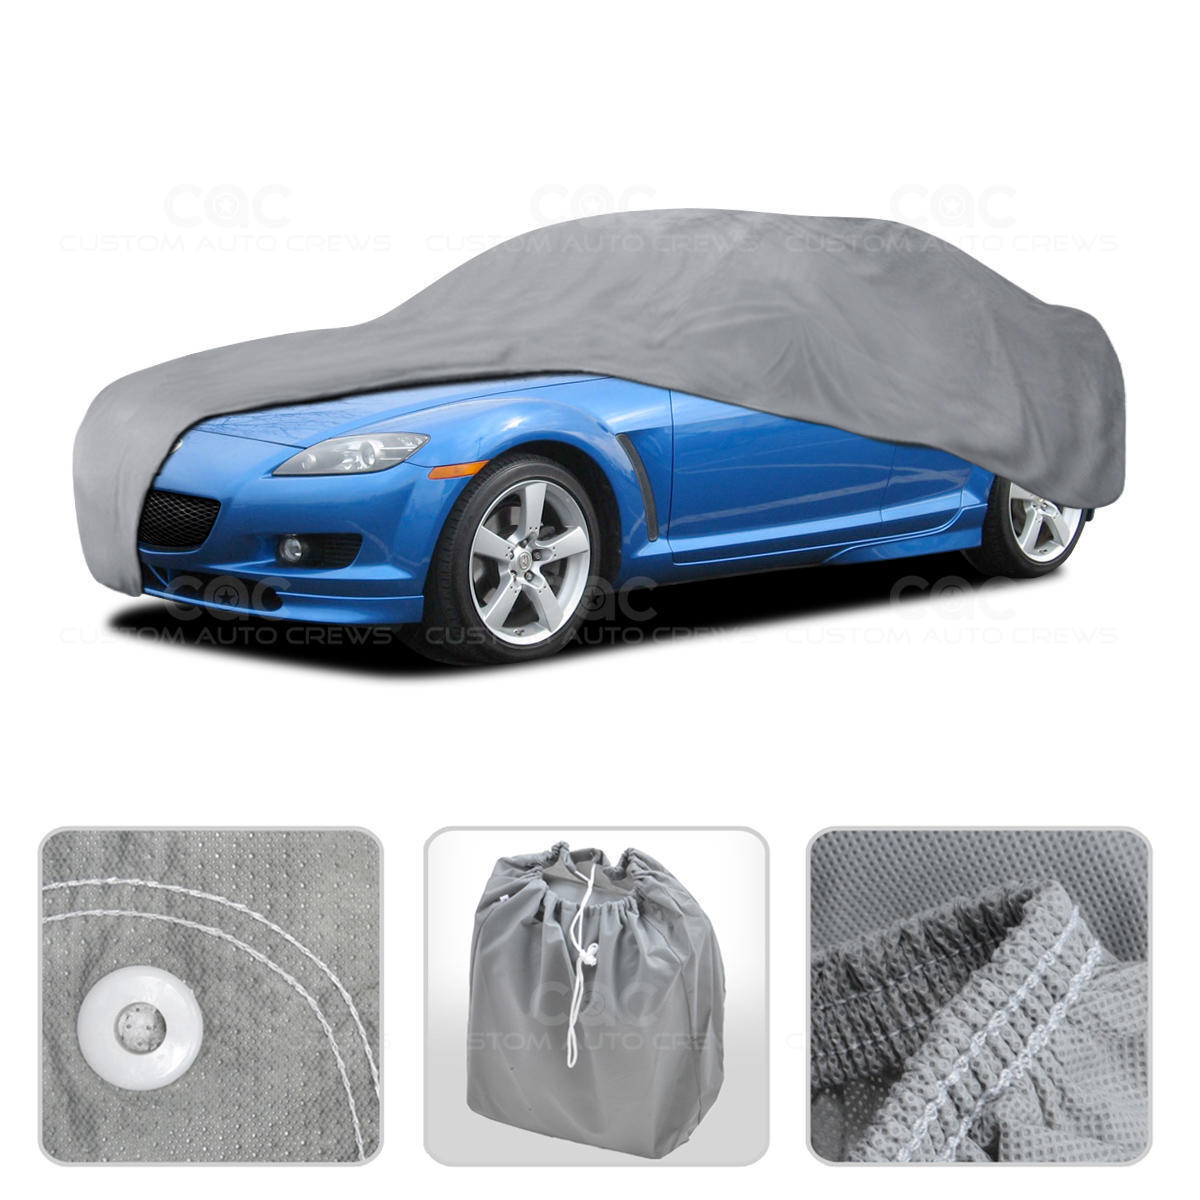 Car Cover for Mazda RX-8 04-11 Outdoor Breathable Sun Dust Proof Protection